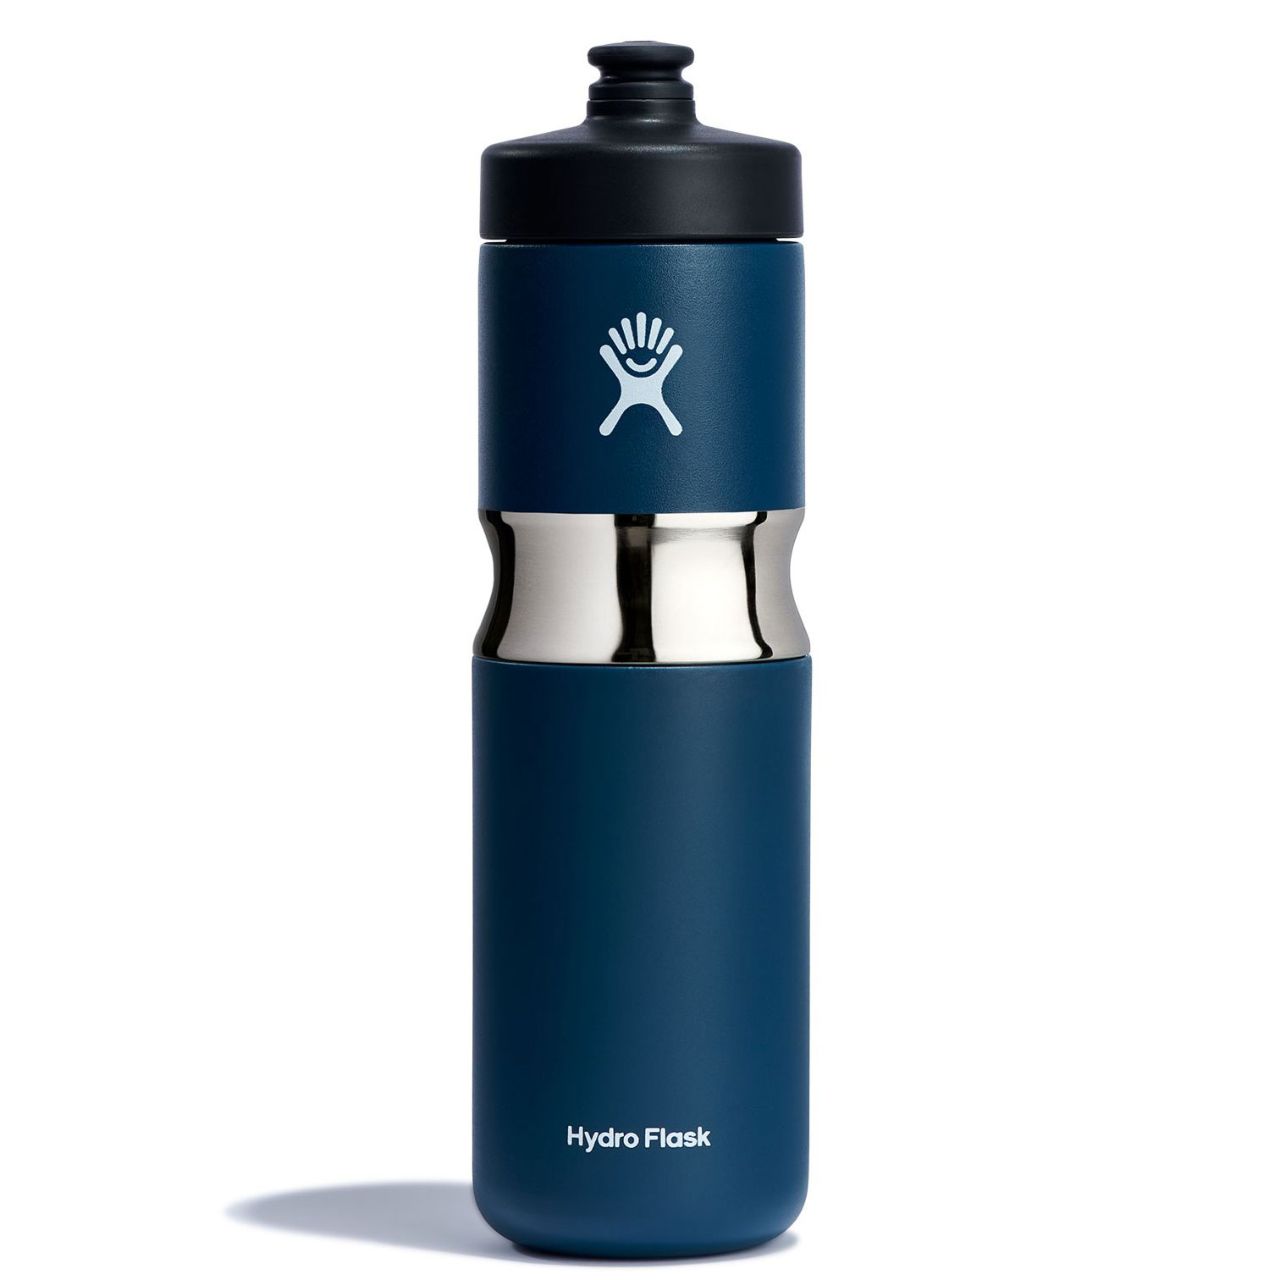 NEW 20 fl oz Hydro Flask Wide Mouth Double Wall Insulated Coffee Tumbler